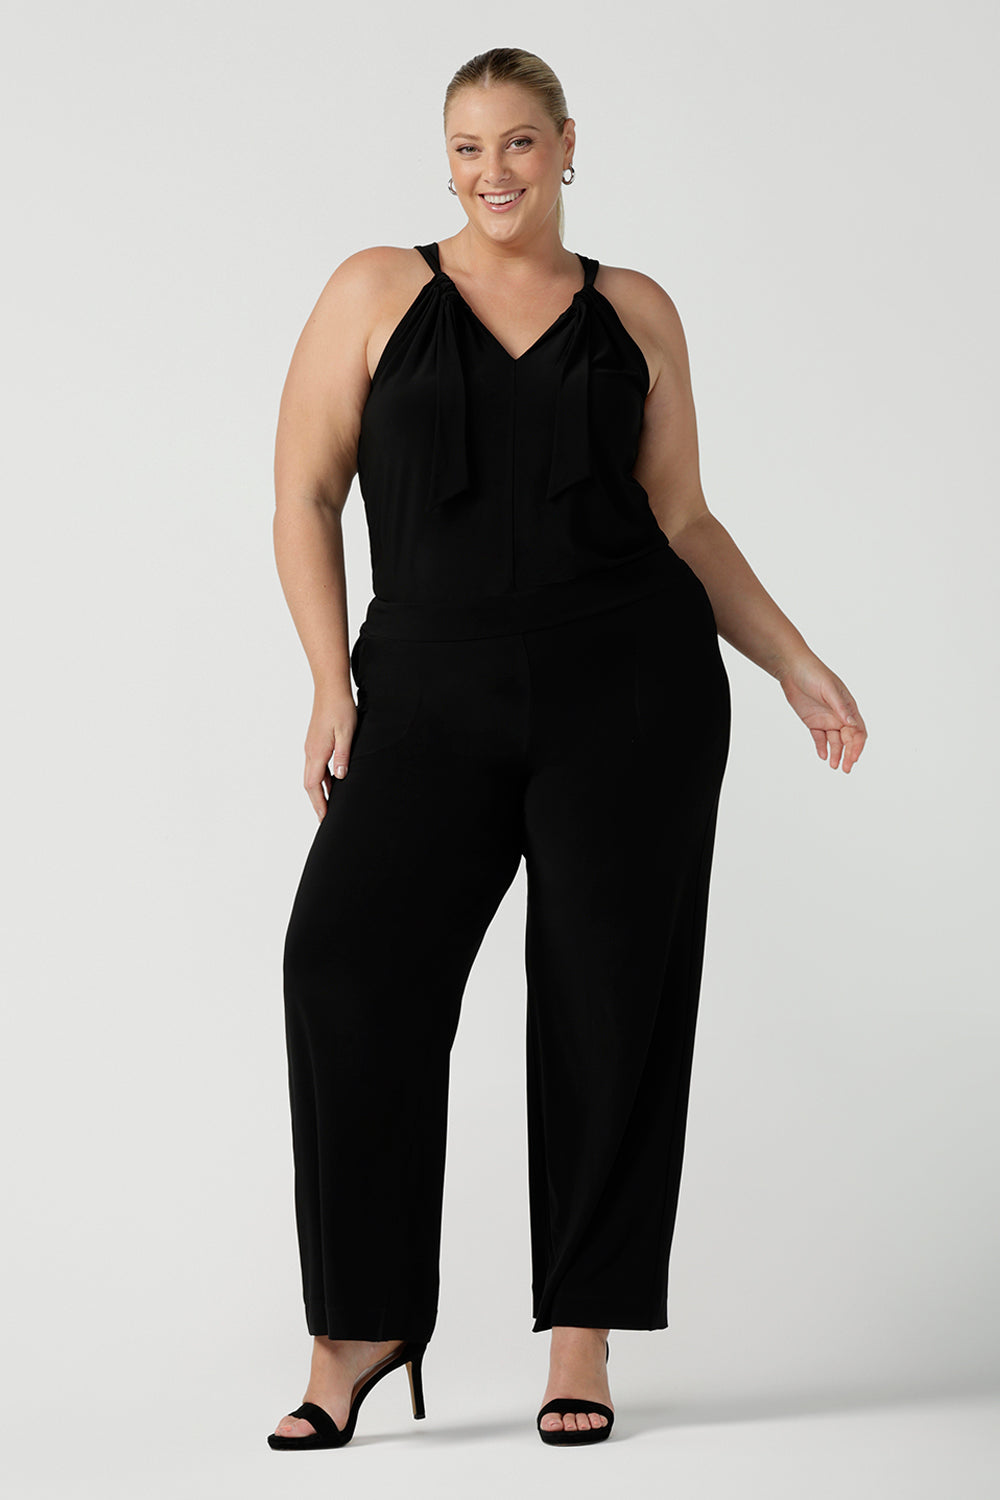 Plus size 18 women wears jumpsuit for curvy women. This black jumpsuit features a halter neck with side pockets and straight legs. Made in Australia in navy stretch jersey this jumpsuit is comfortable for work or weekend wear.  